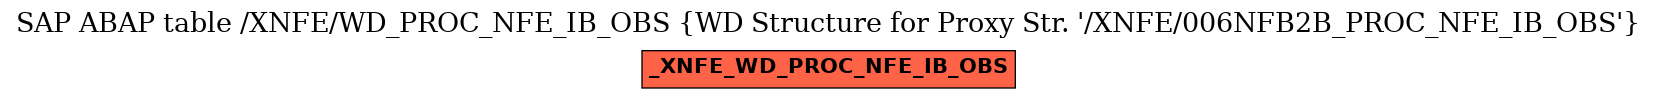 E-R Diagram for table /XNFE/WD_PROC_NFE_IB_OBS (WD Structure for Proxy Str. 